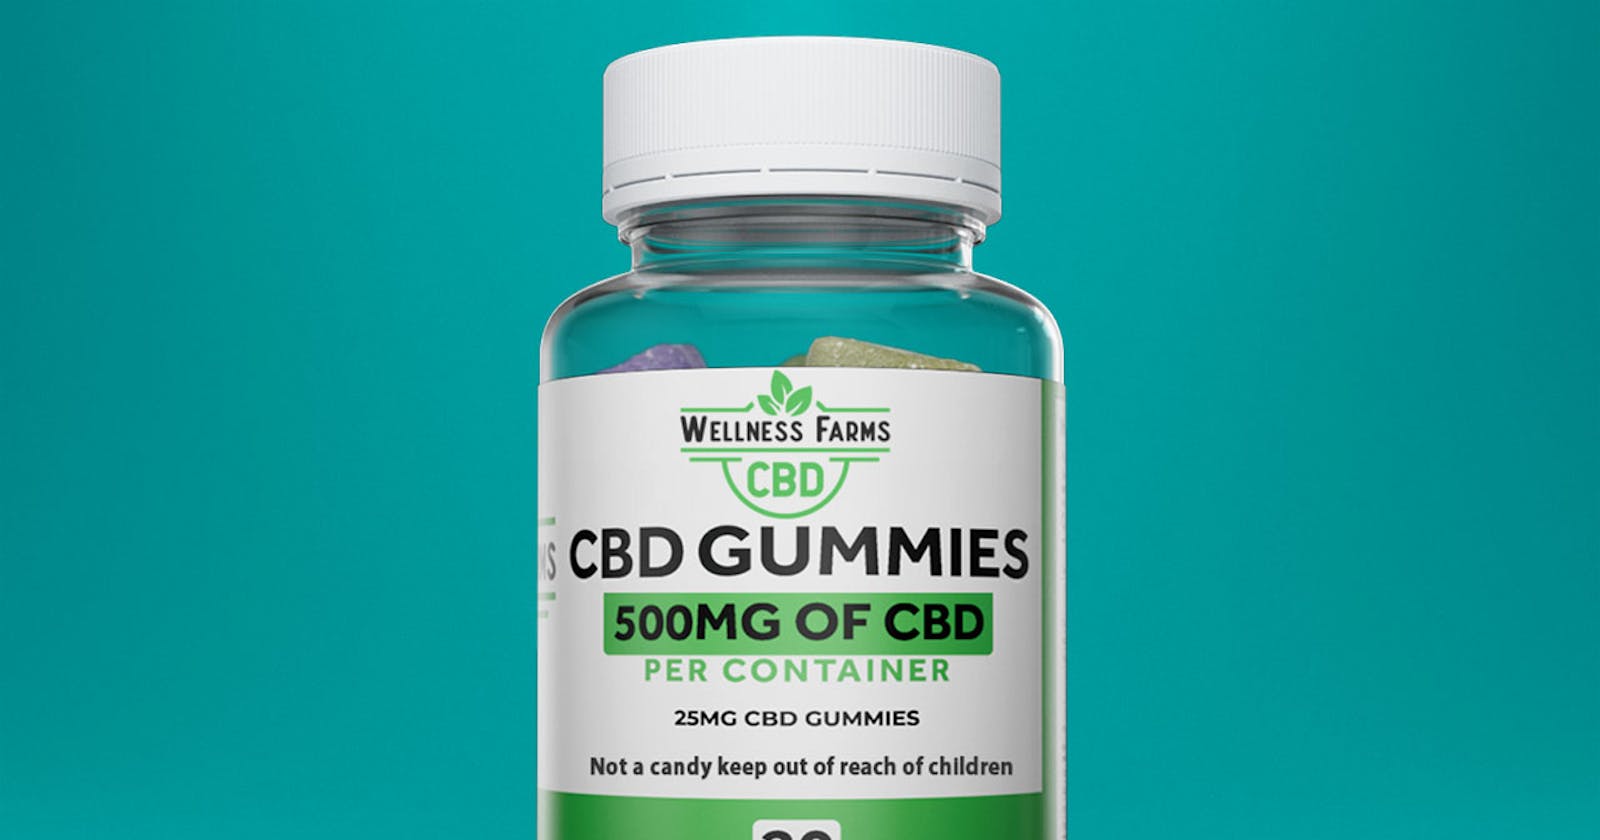 Wellness Farms CBD Gummies Don't Buy Before Read Official Reviews!